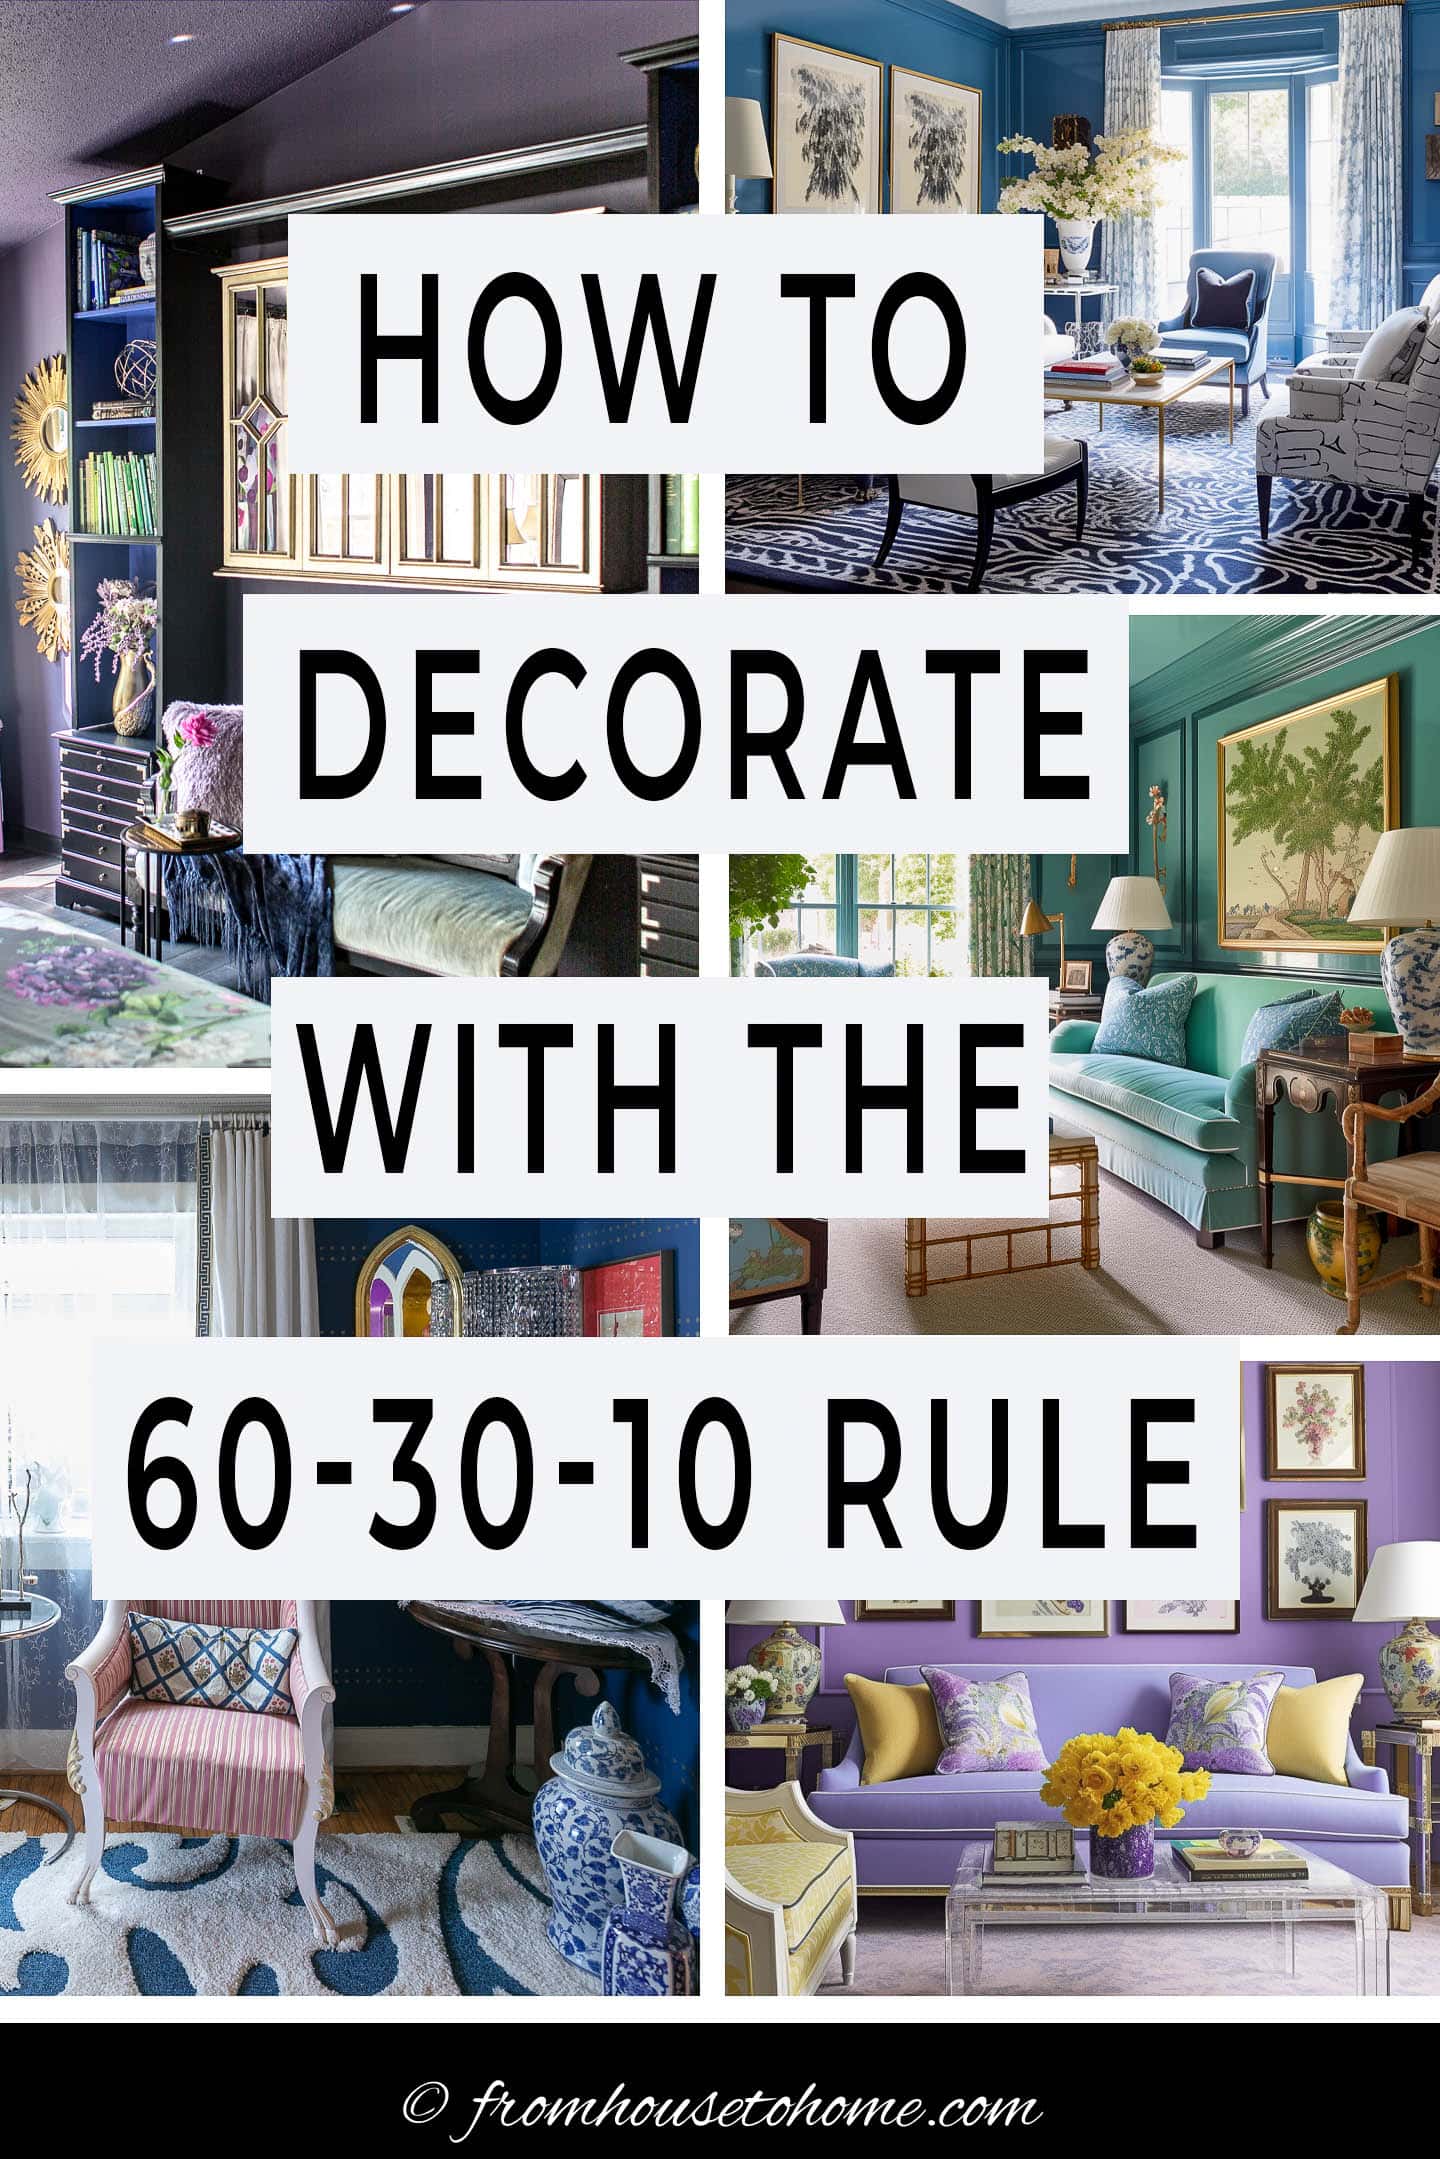 how to decorate with the 60-30-10 rule